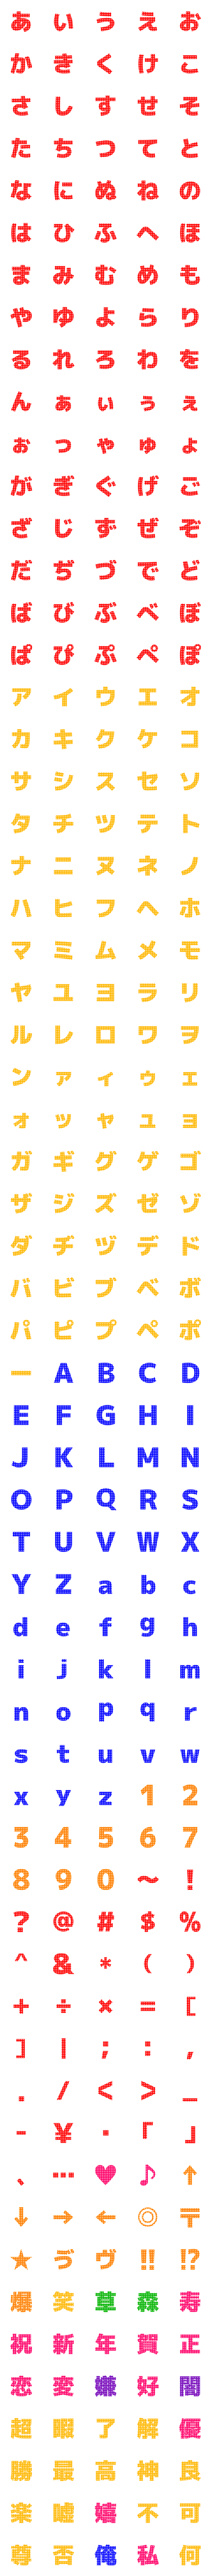 [LINE絵文字]水玉模様 デコ文字 -ゴシック体-の画像一覧